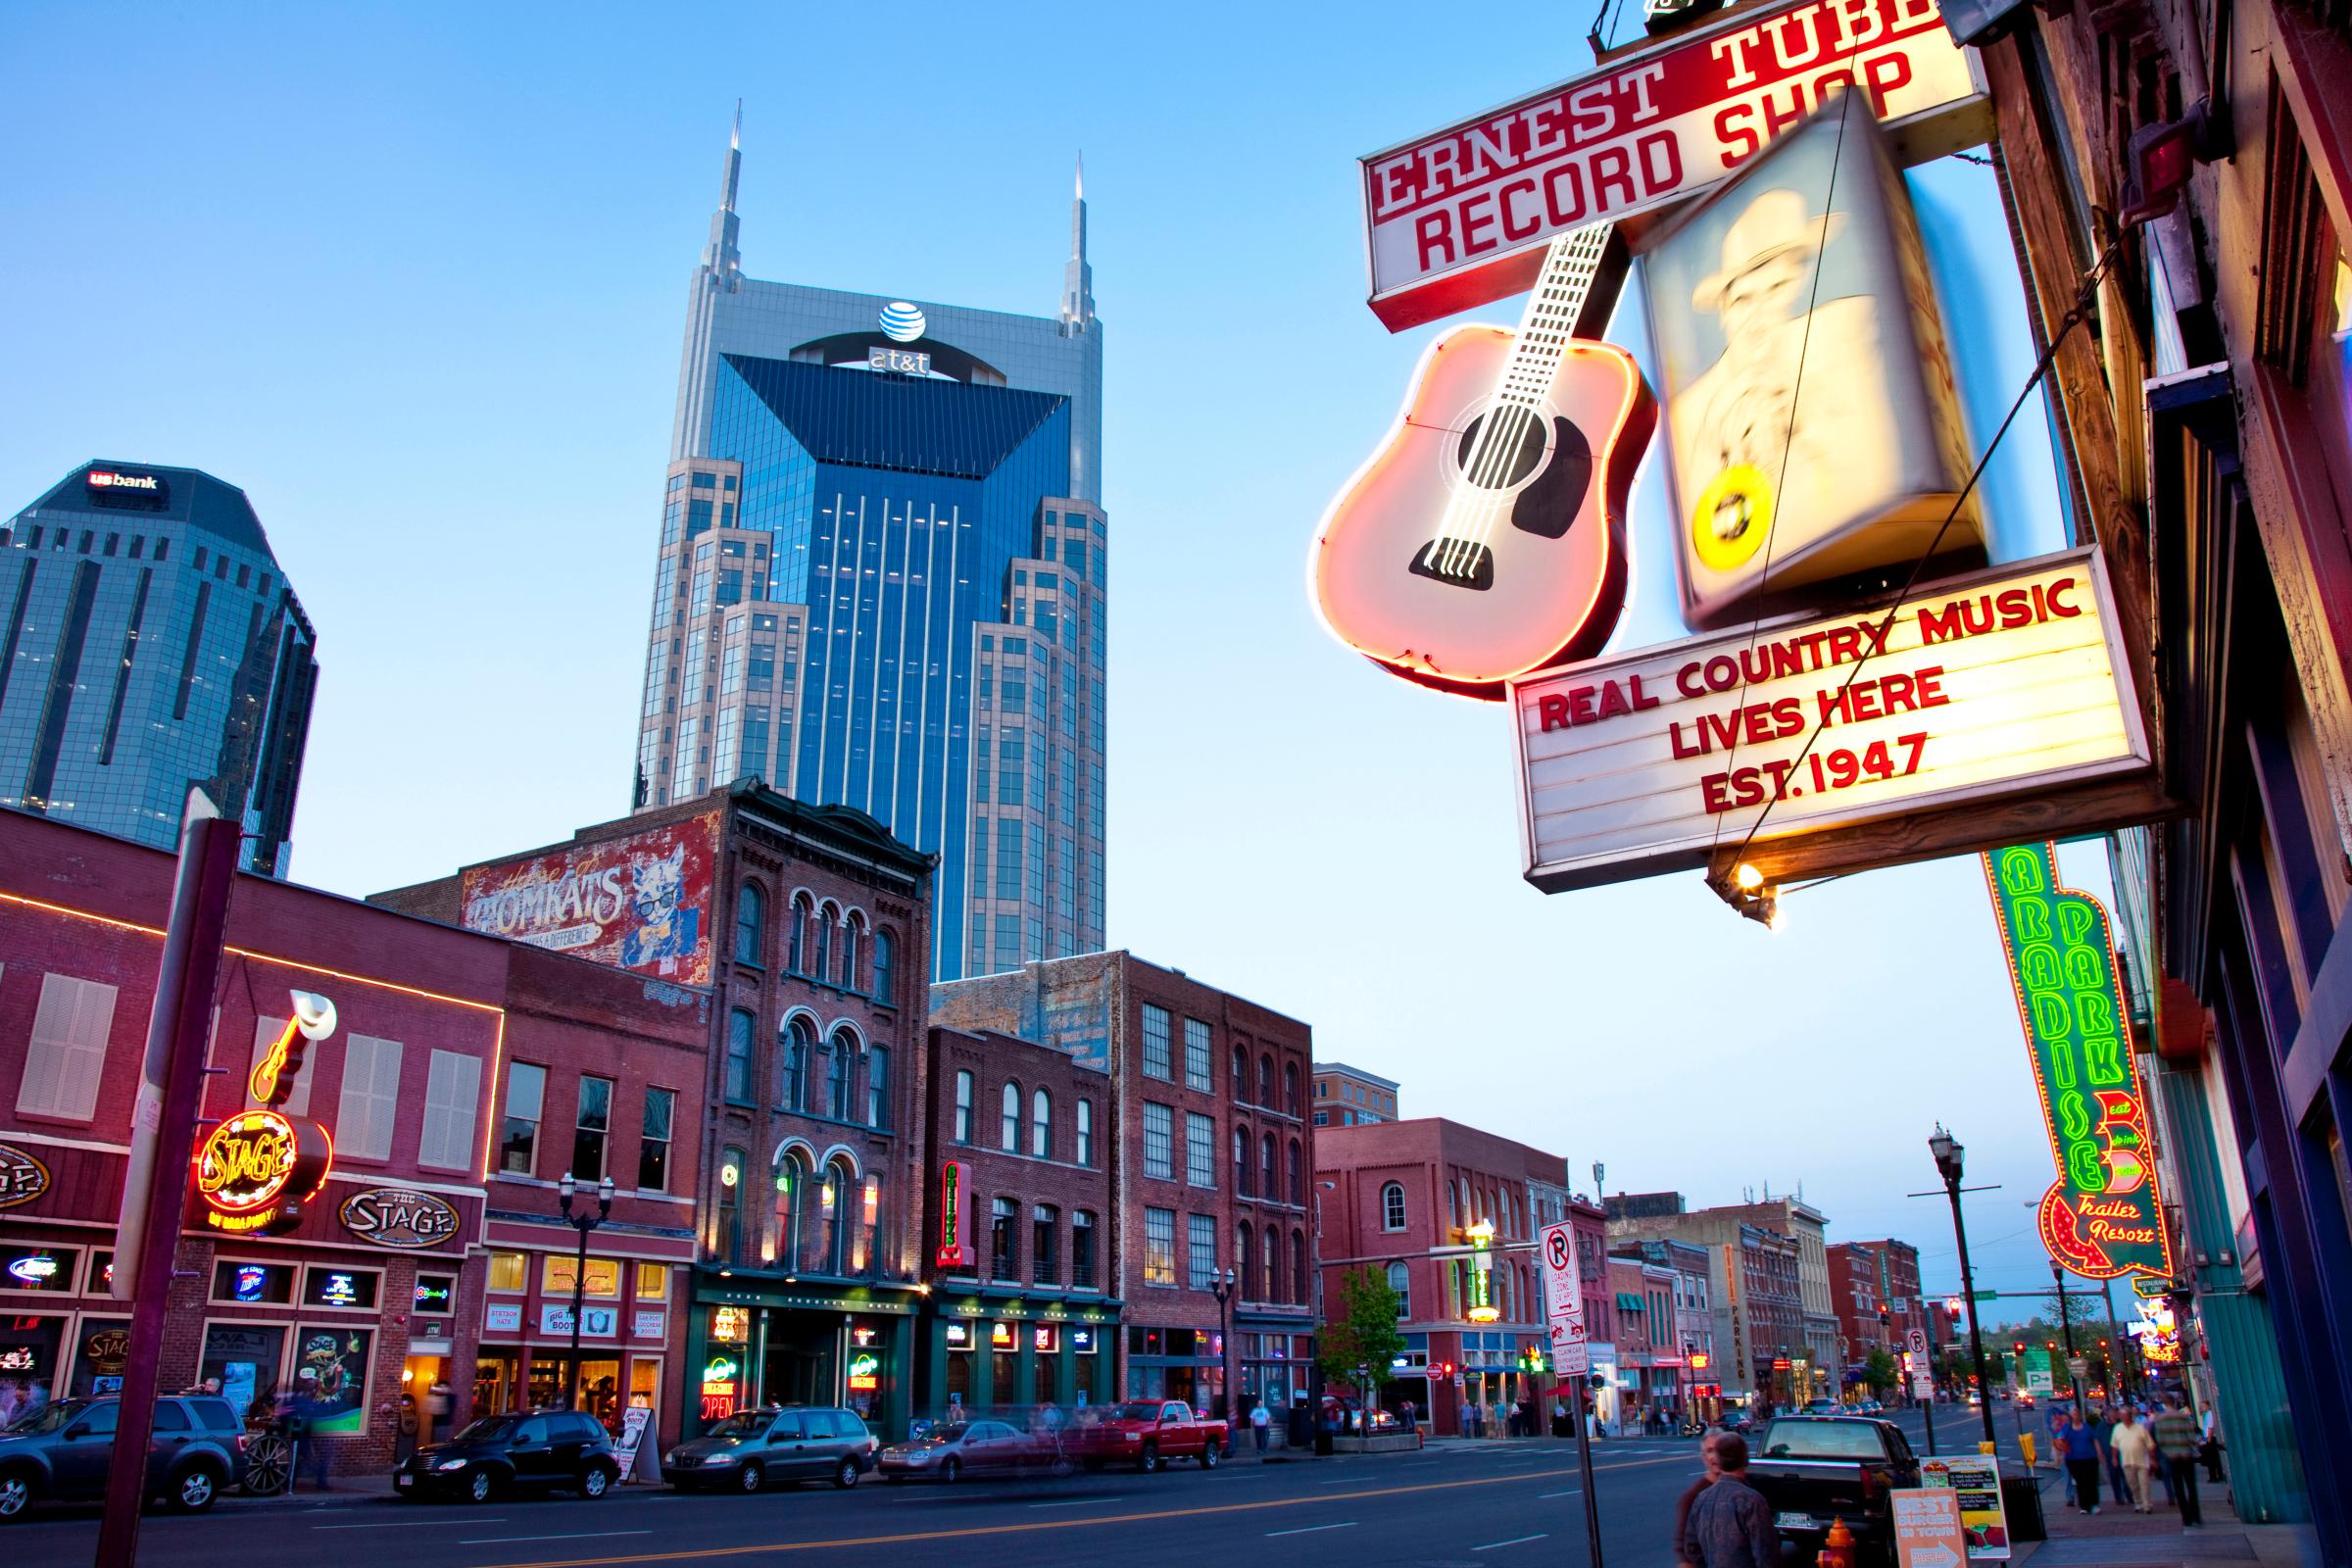 ATandT building towers over historic buildings of lower Broadway, Nashville, Tennessee, USA